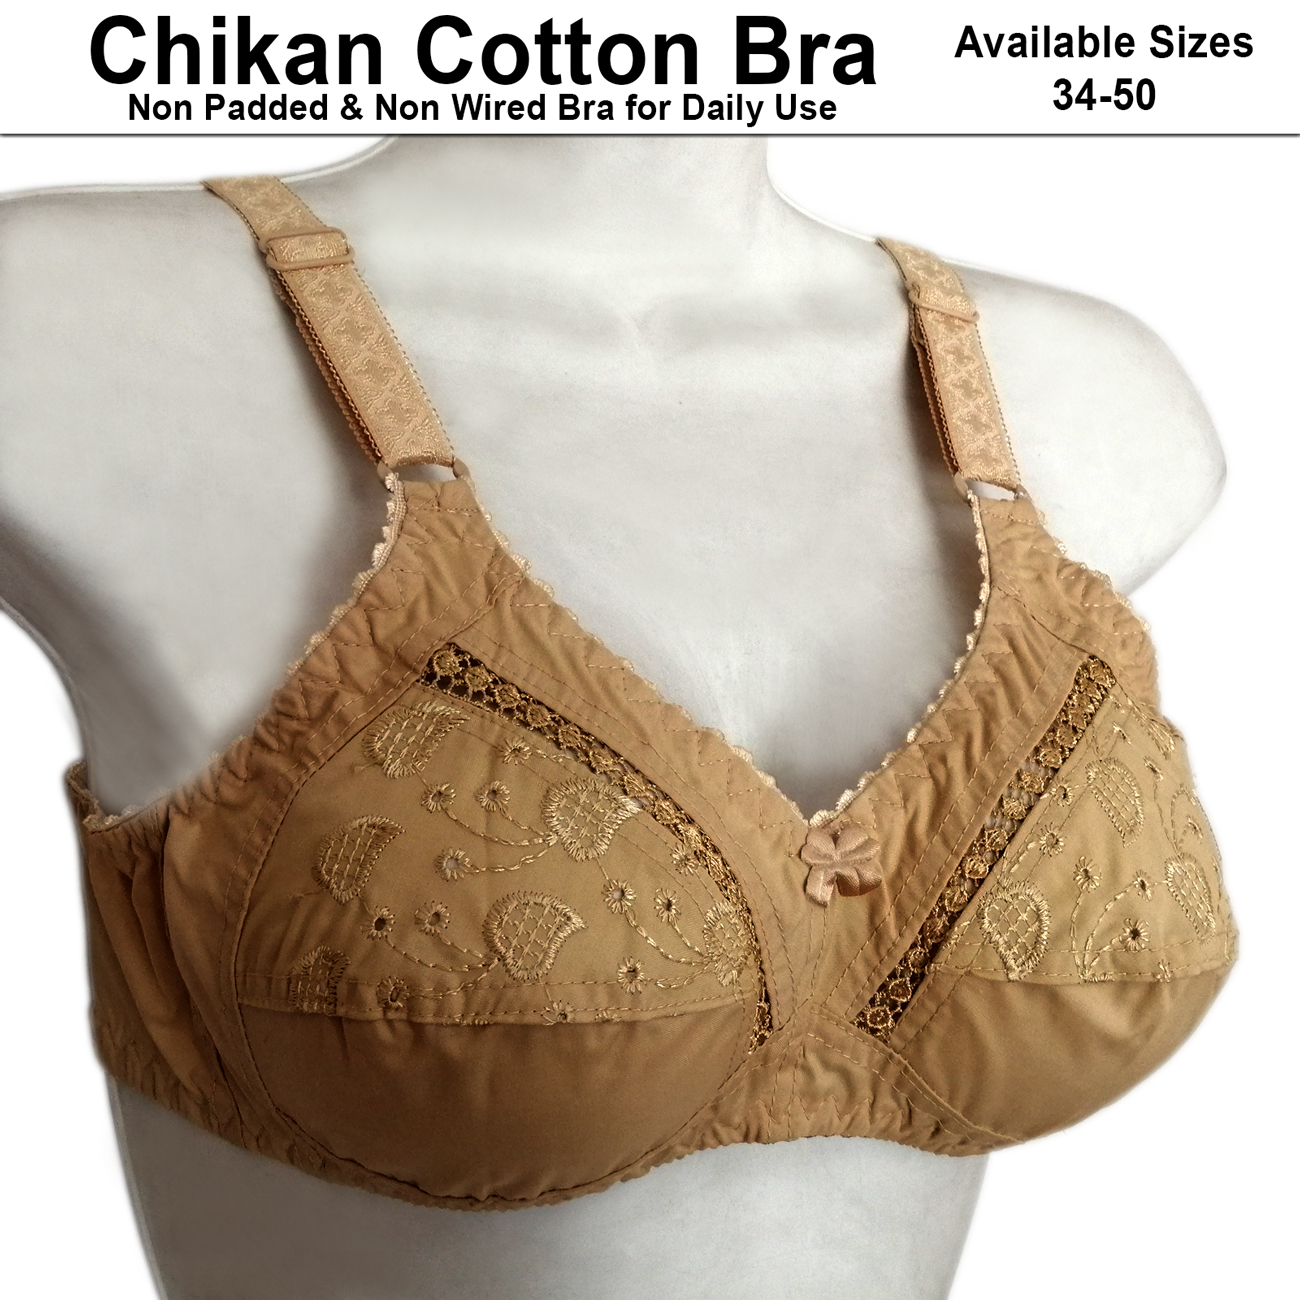 Best Quality Non Padded Bras for Women with Chikan Embroidery Casual Bras  for Girls Inner Wear Ladies Brassiere for B and C Cups Comfortable Brazzer  in Beige 34 to 50 Size Bra